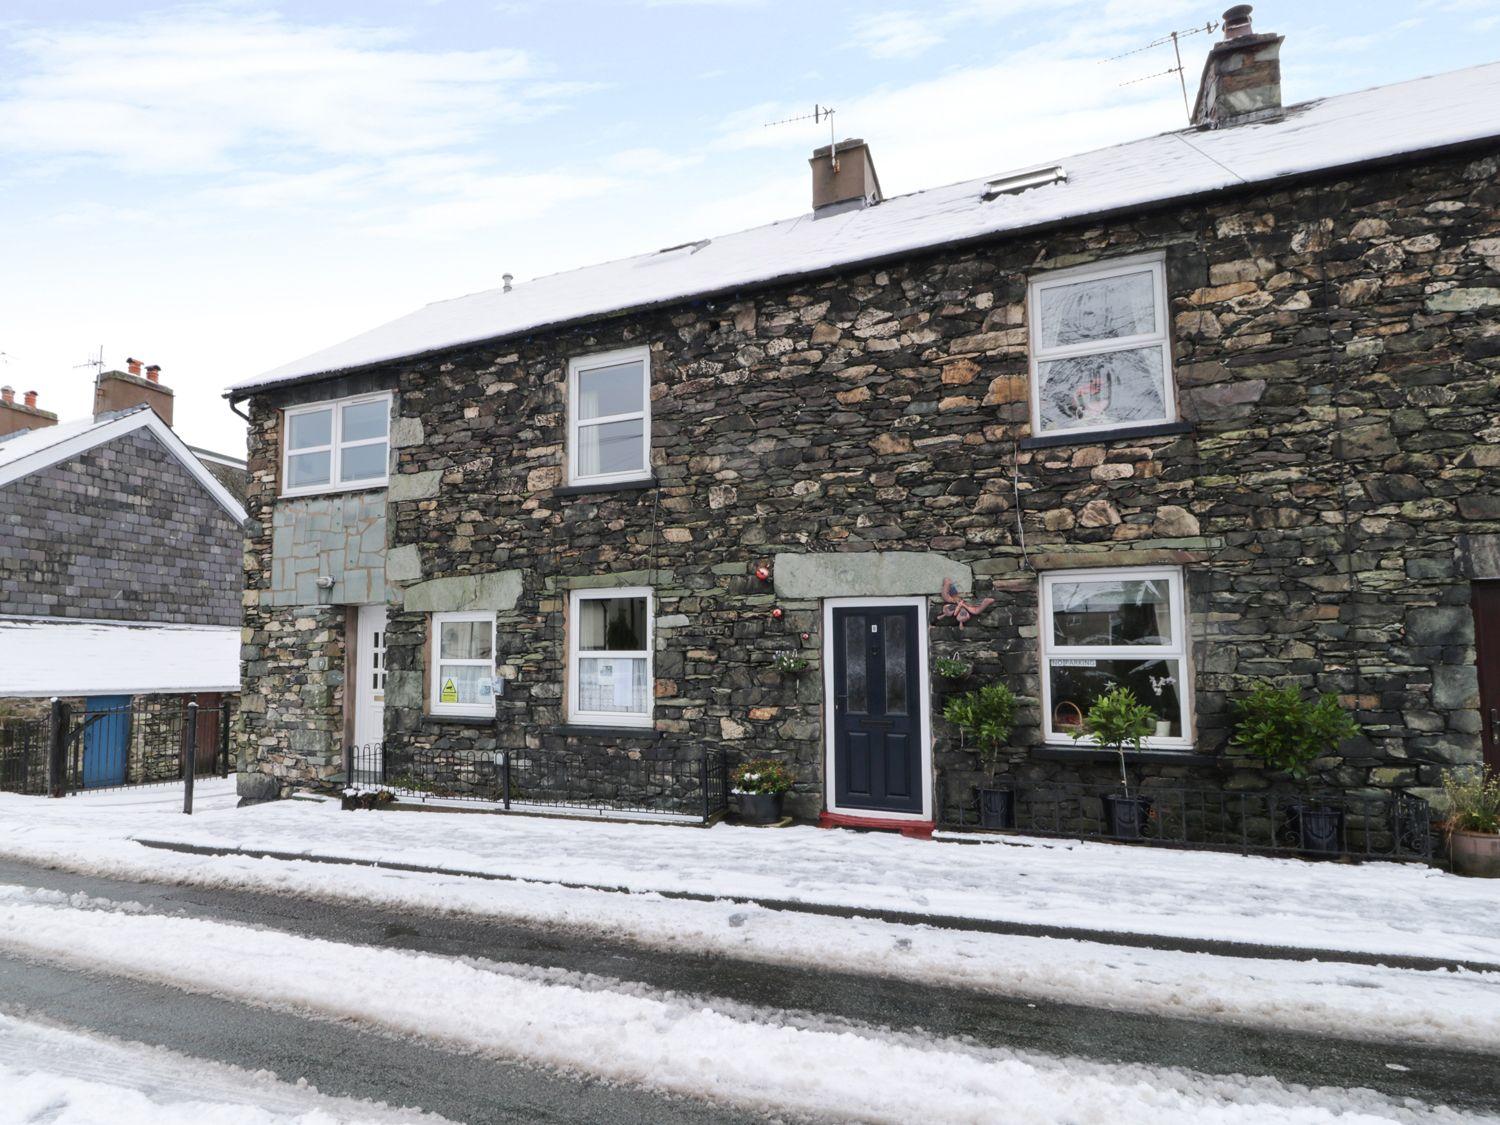 Holiday Cottage Reviews for 7 Stybarrow Terrace - Self Catering Property in Glenridding, Cumbria